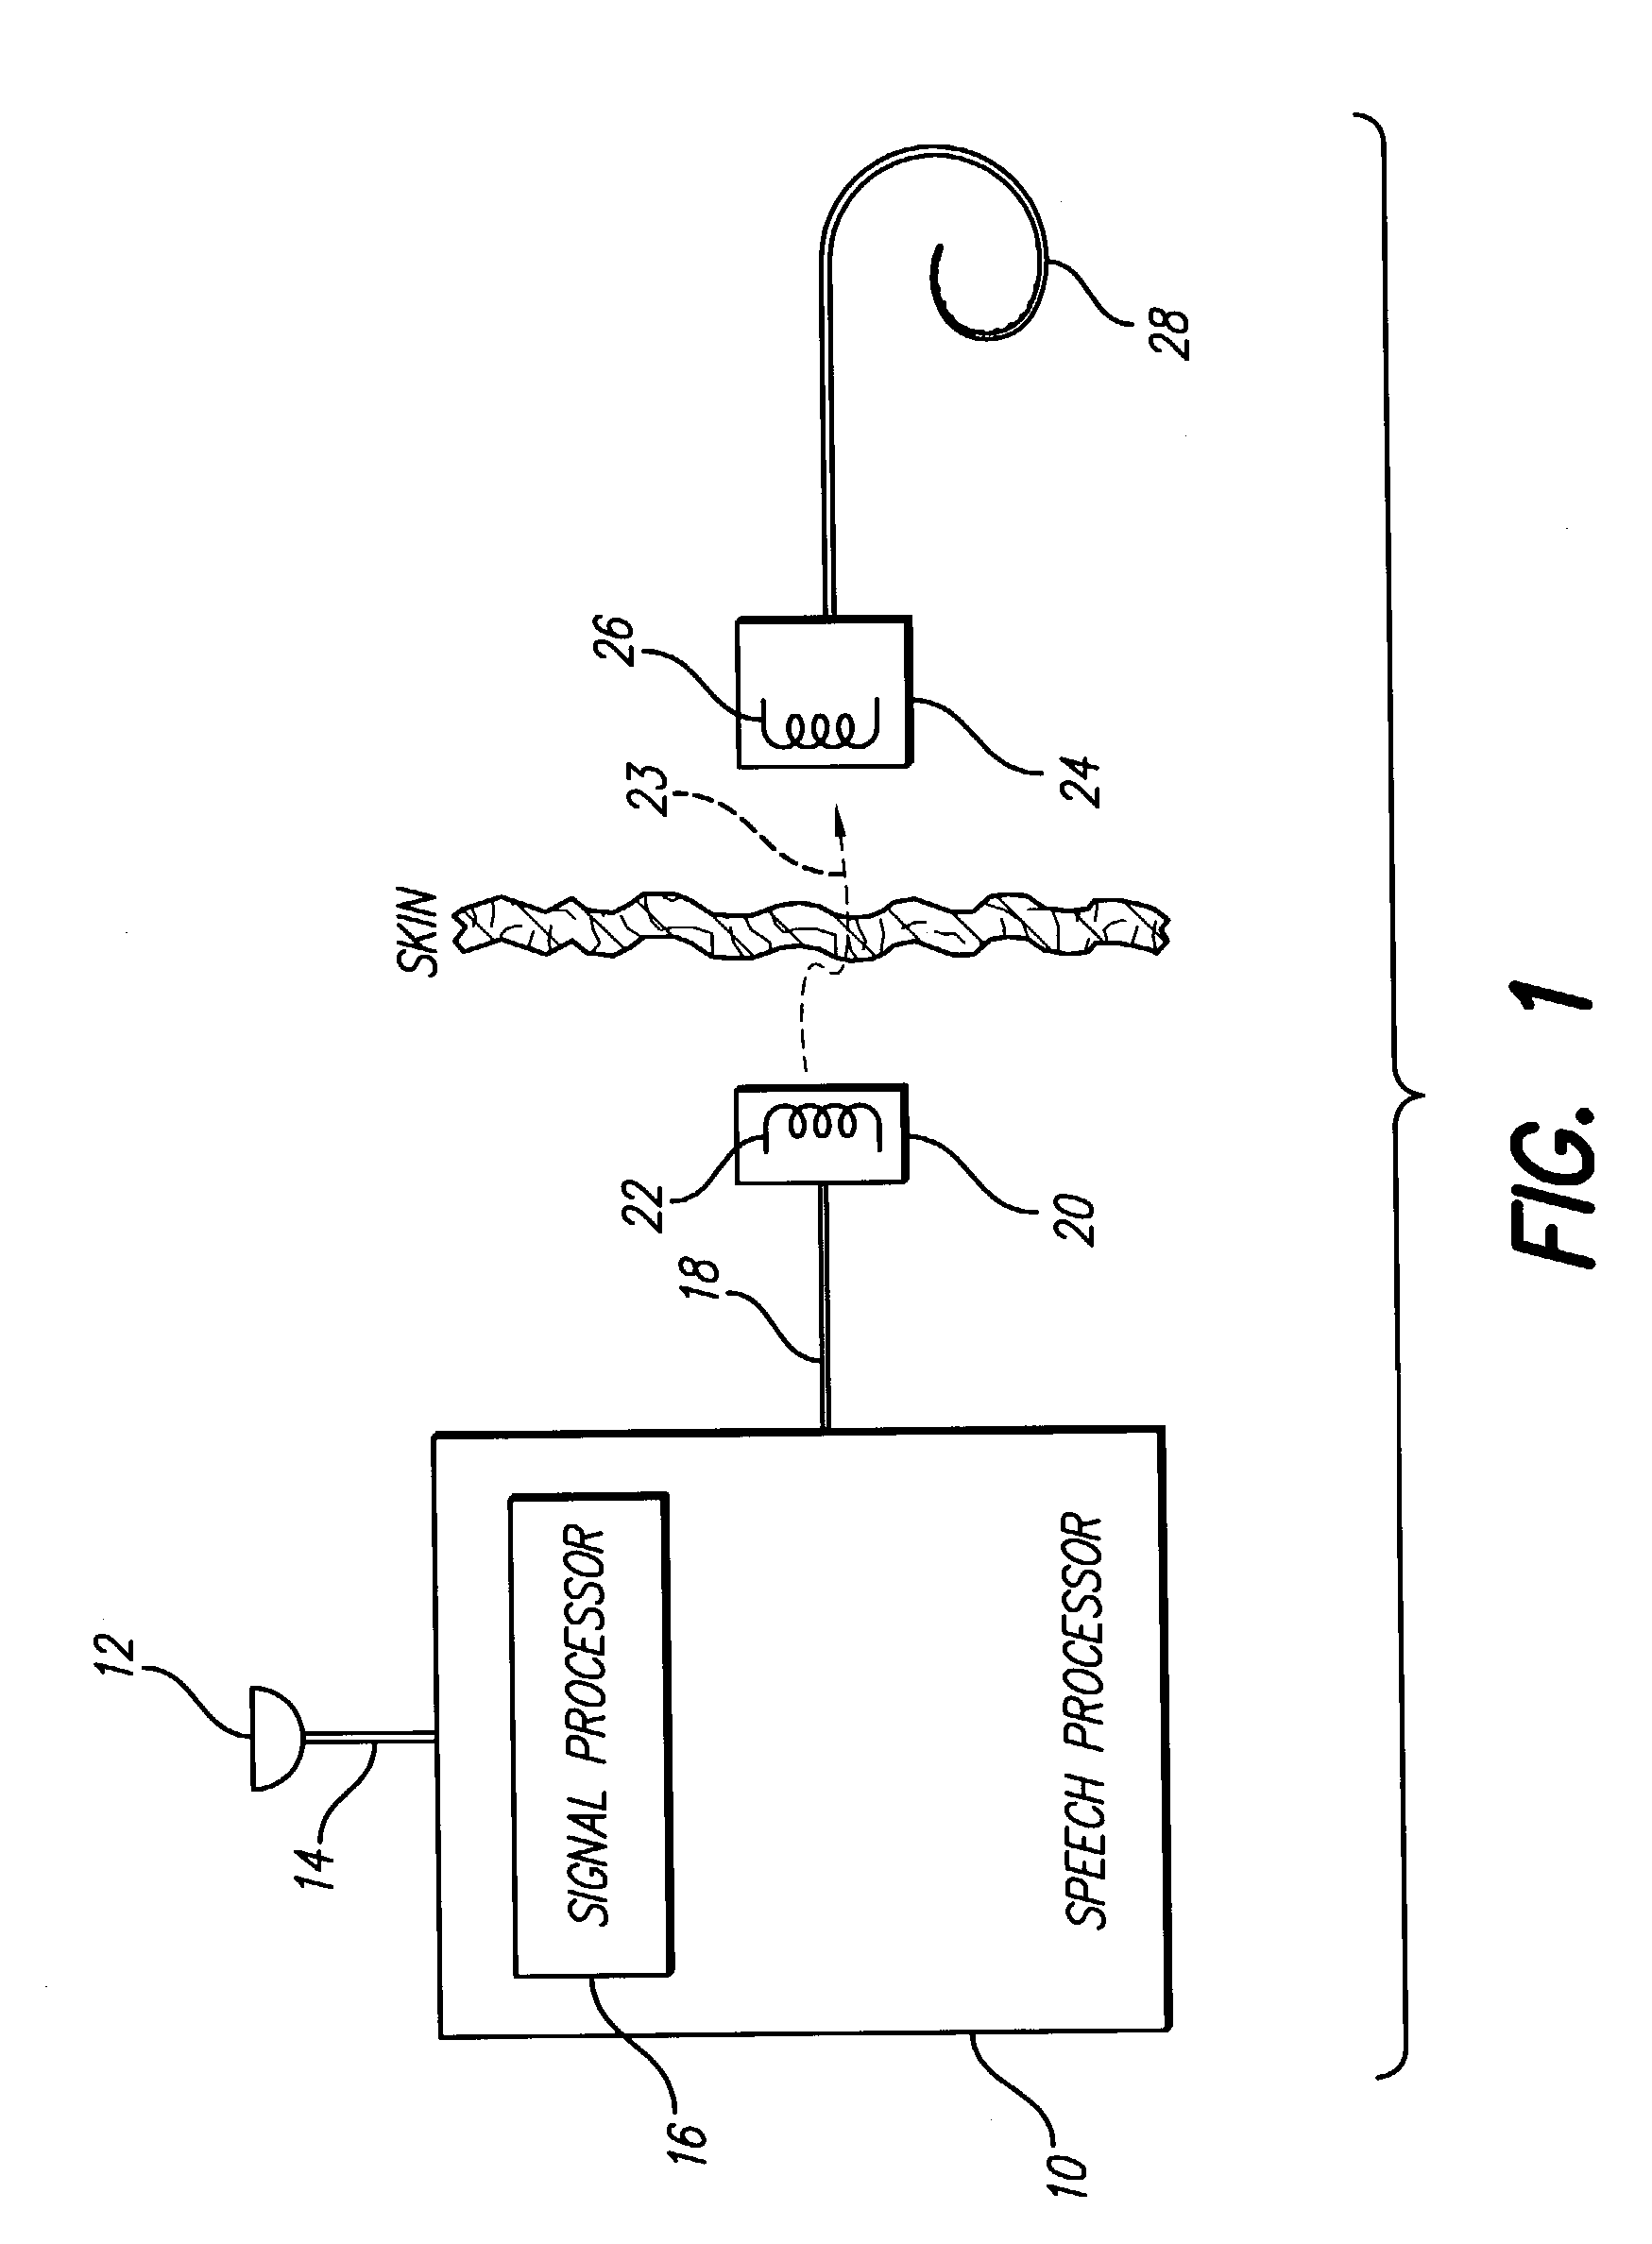 Distributed compression amplitude mapping for cochlear implants